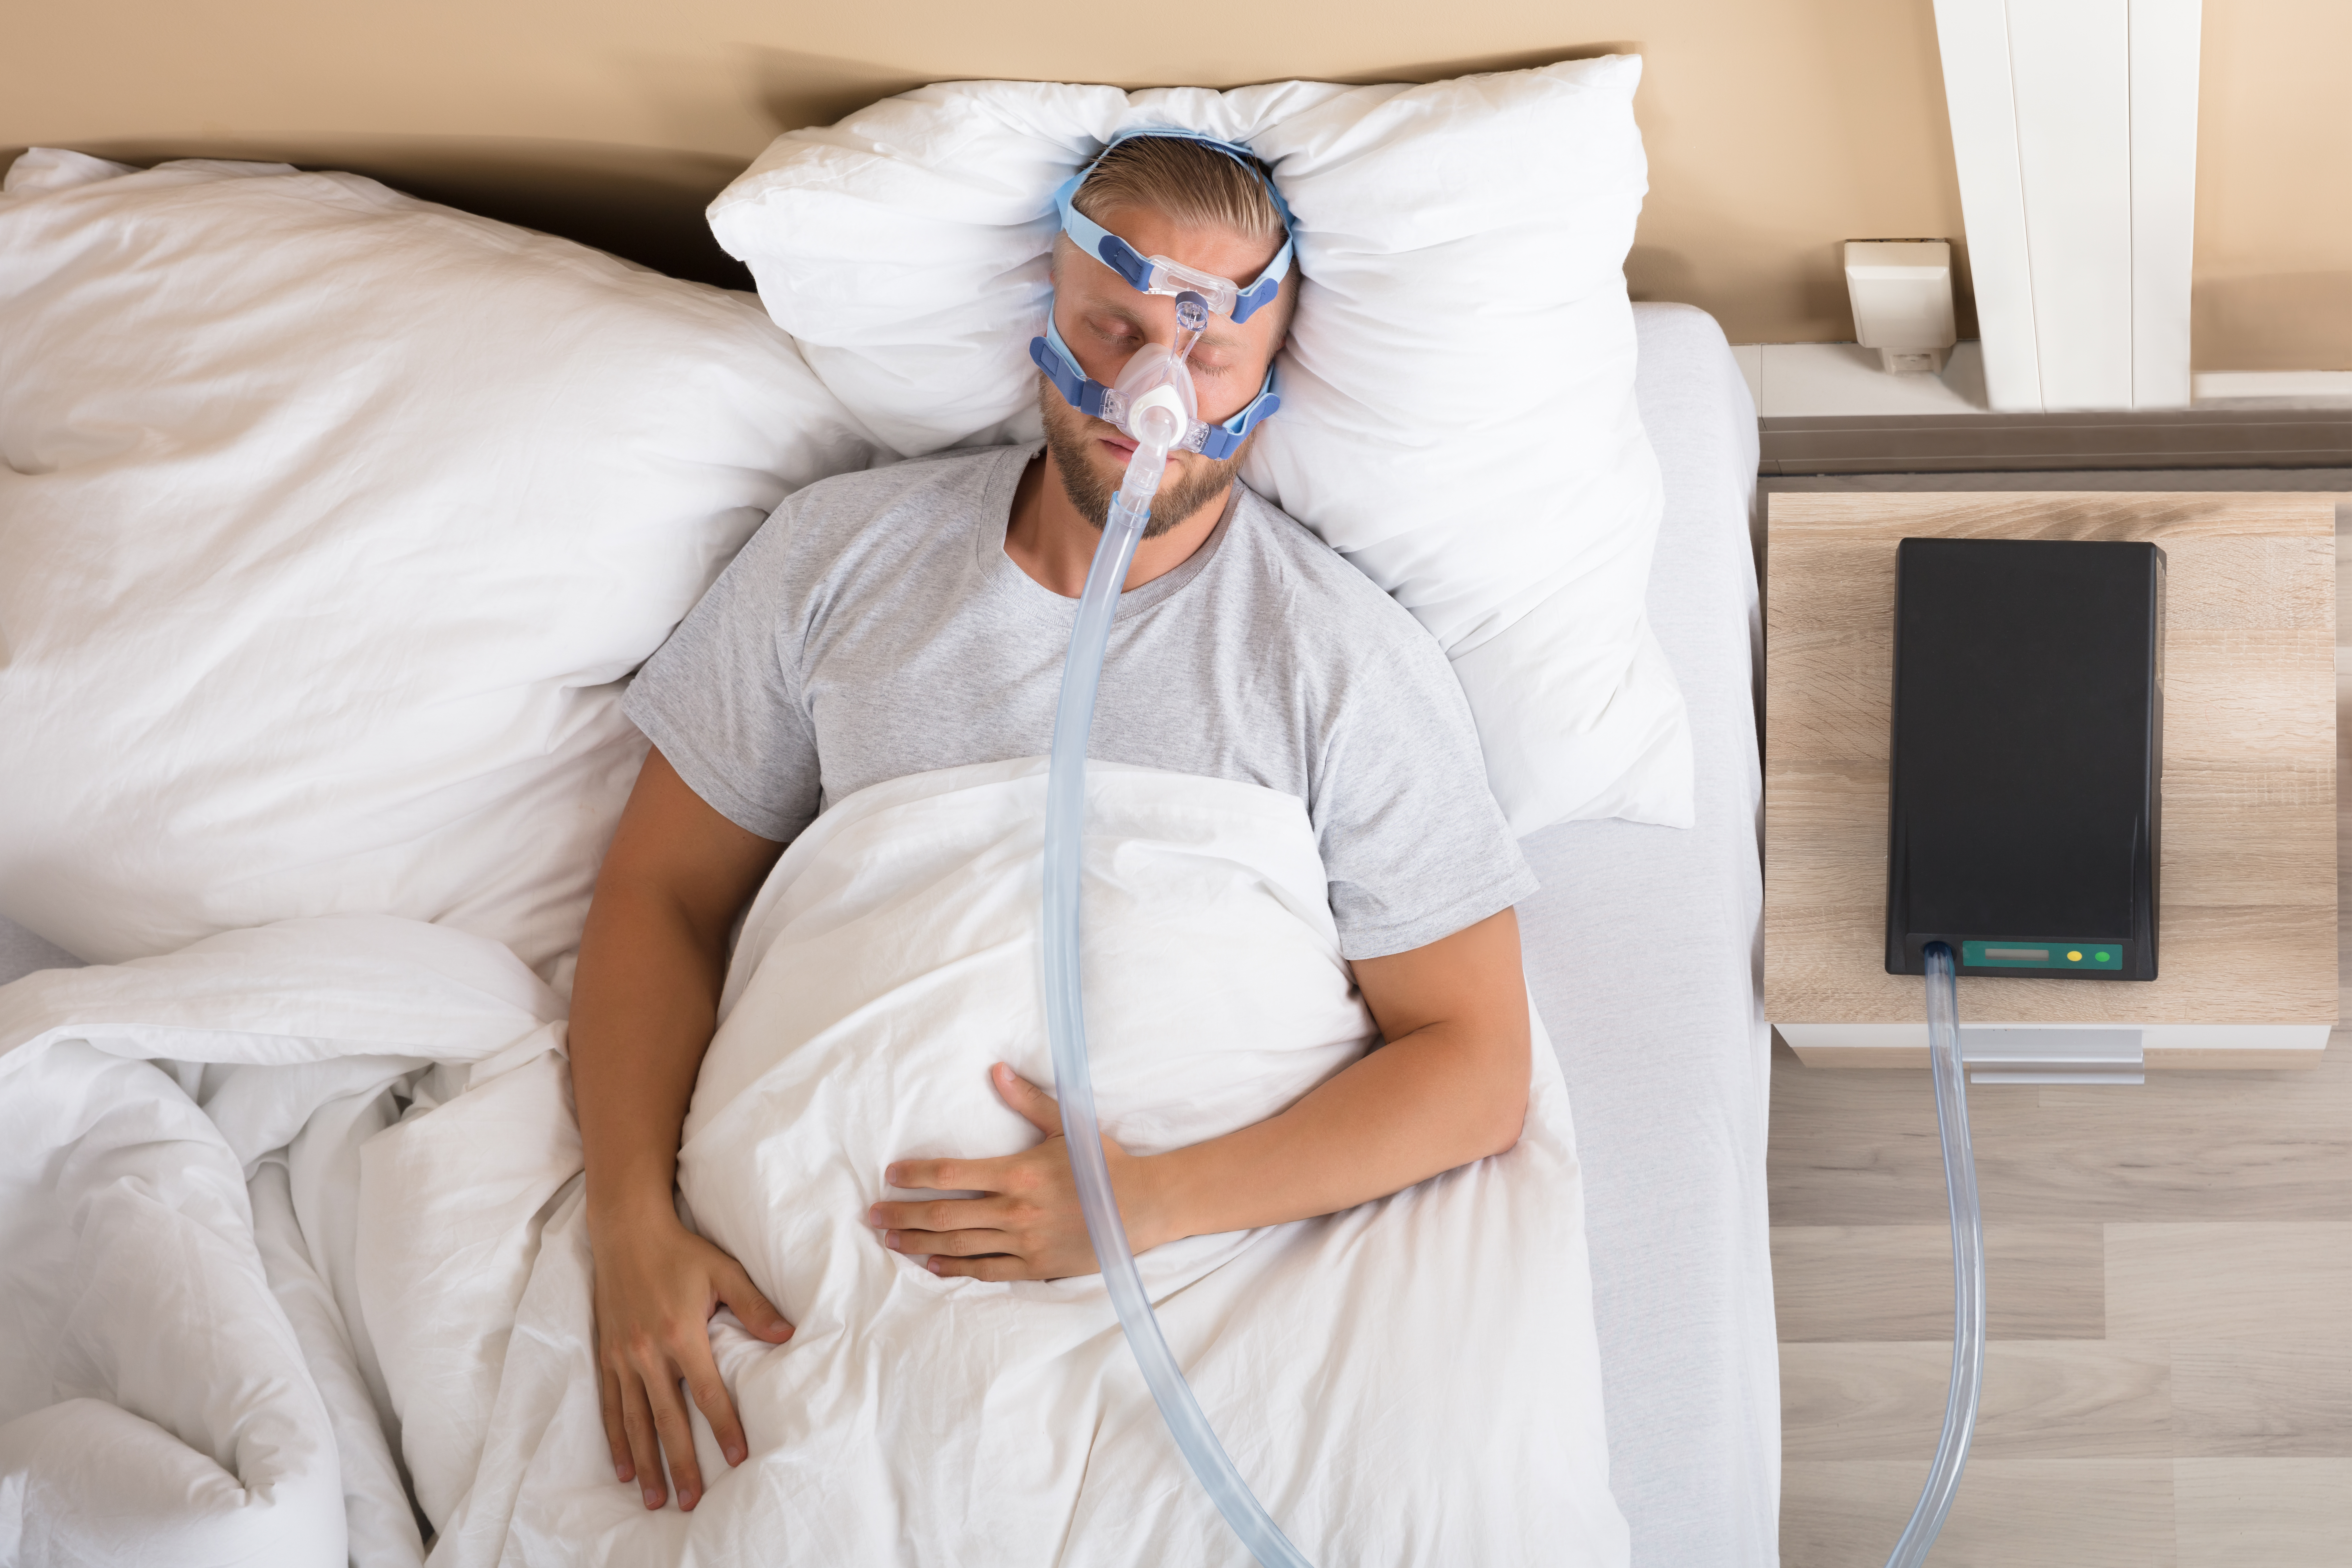 Philips recalled 17 million CPAP and BiPAP masks used by individuals with sleep apnea because of potential health risks.